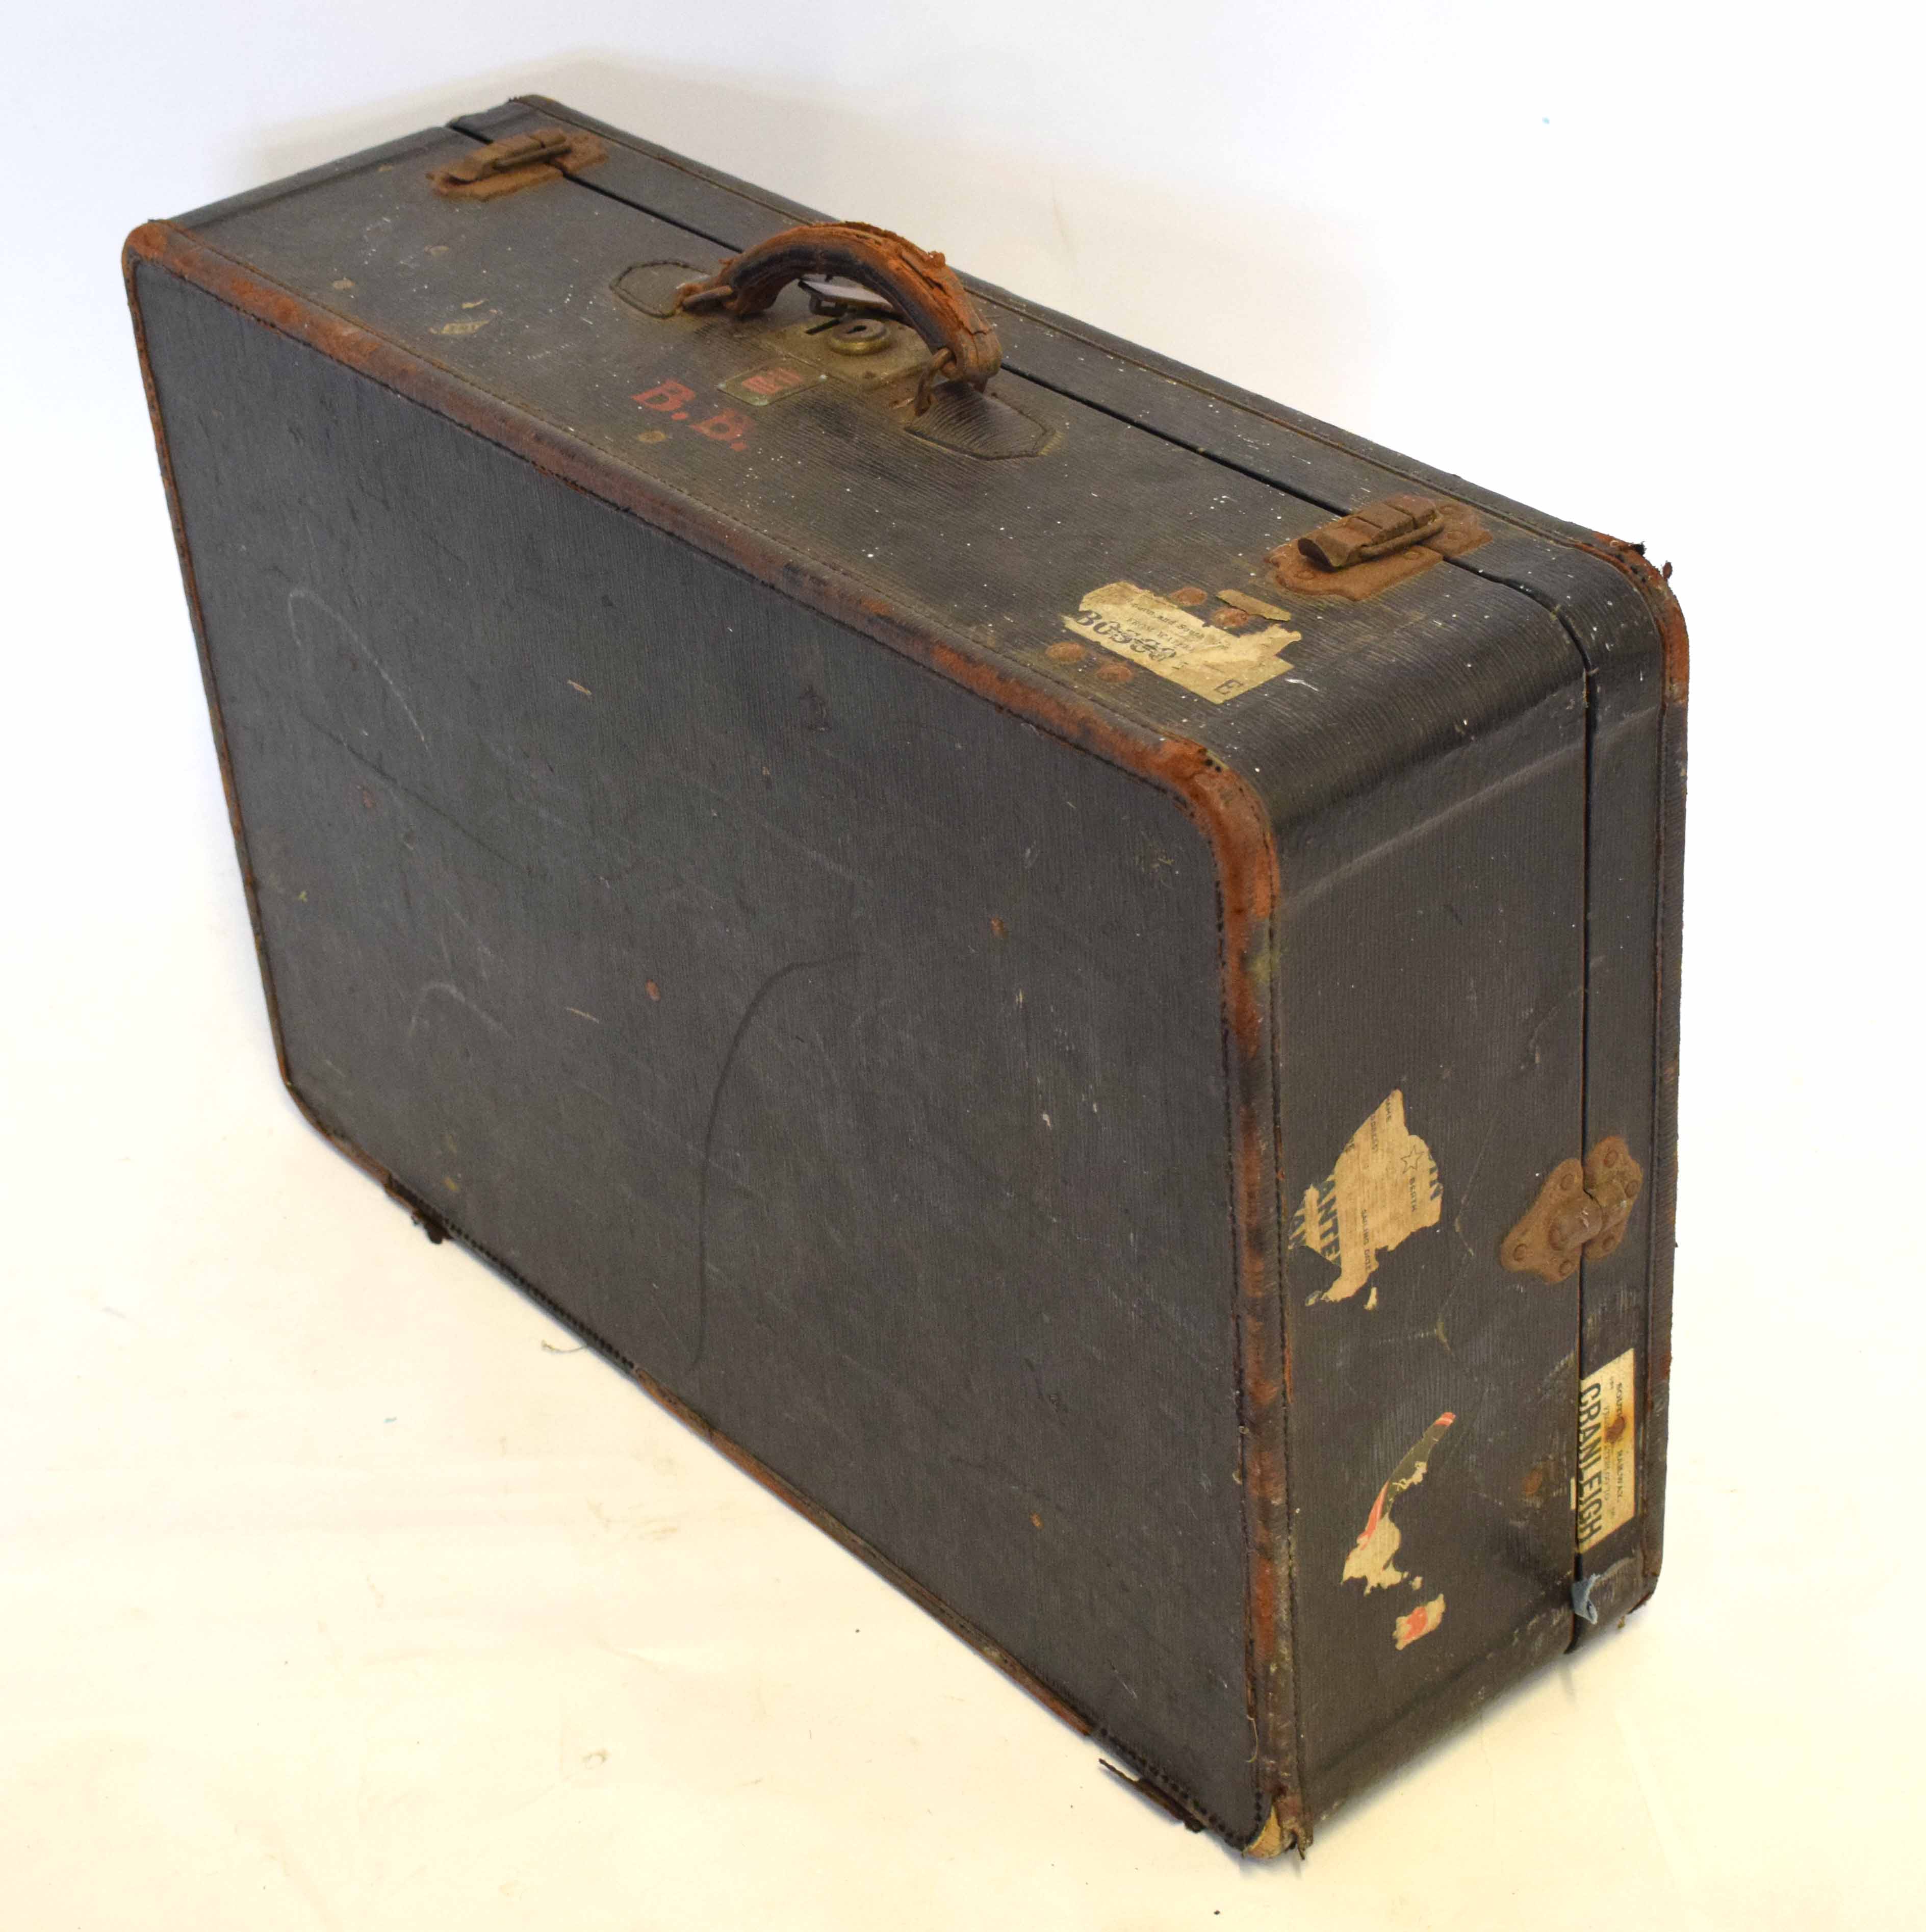 Vintage suitcase with various labels and leather handle with metal fixtures